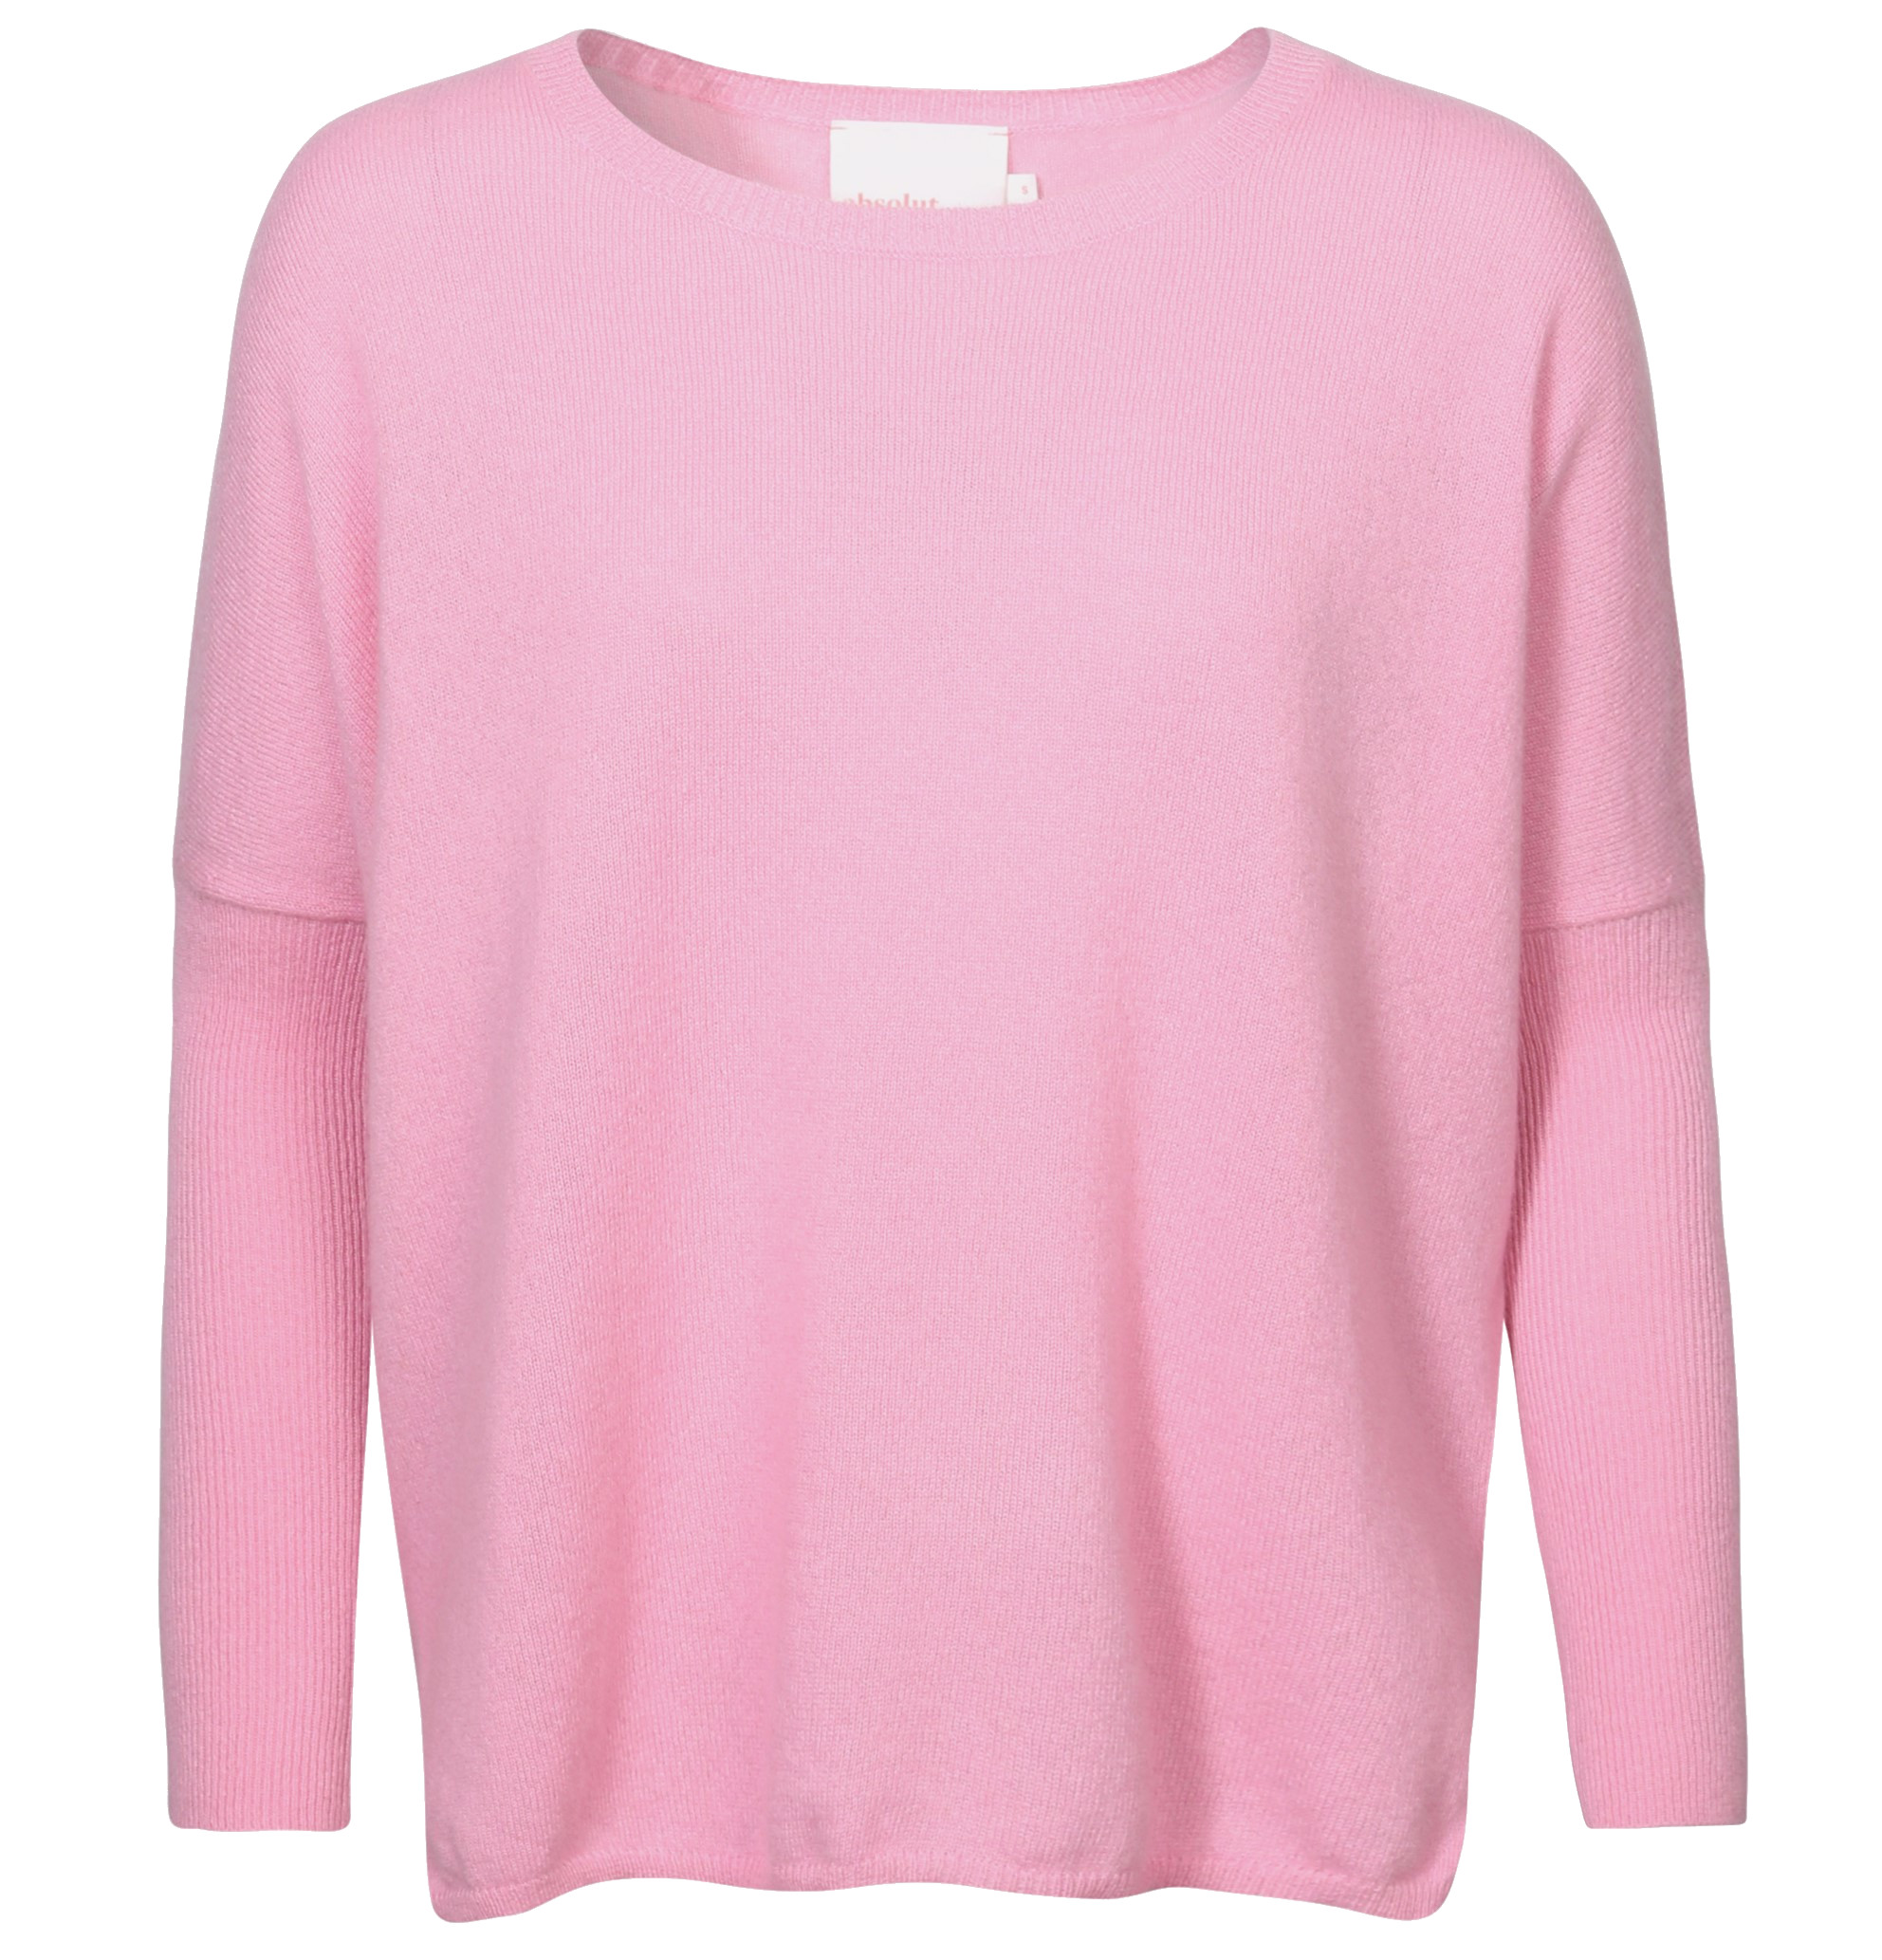 ABSOLUT CASHMERE Poncho Sweater Astrid in Light Pink L